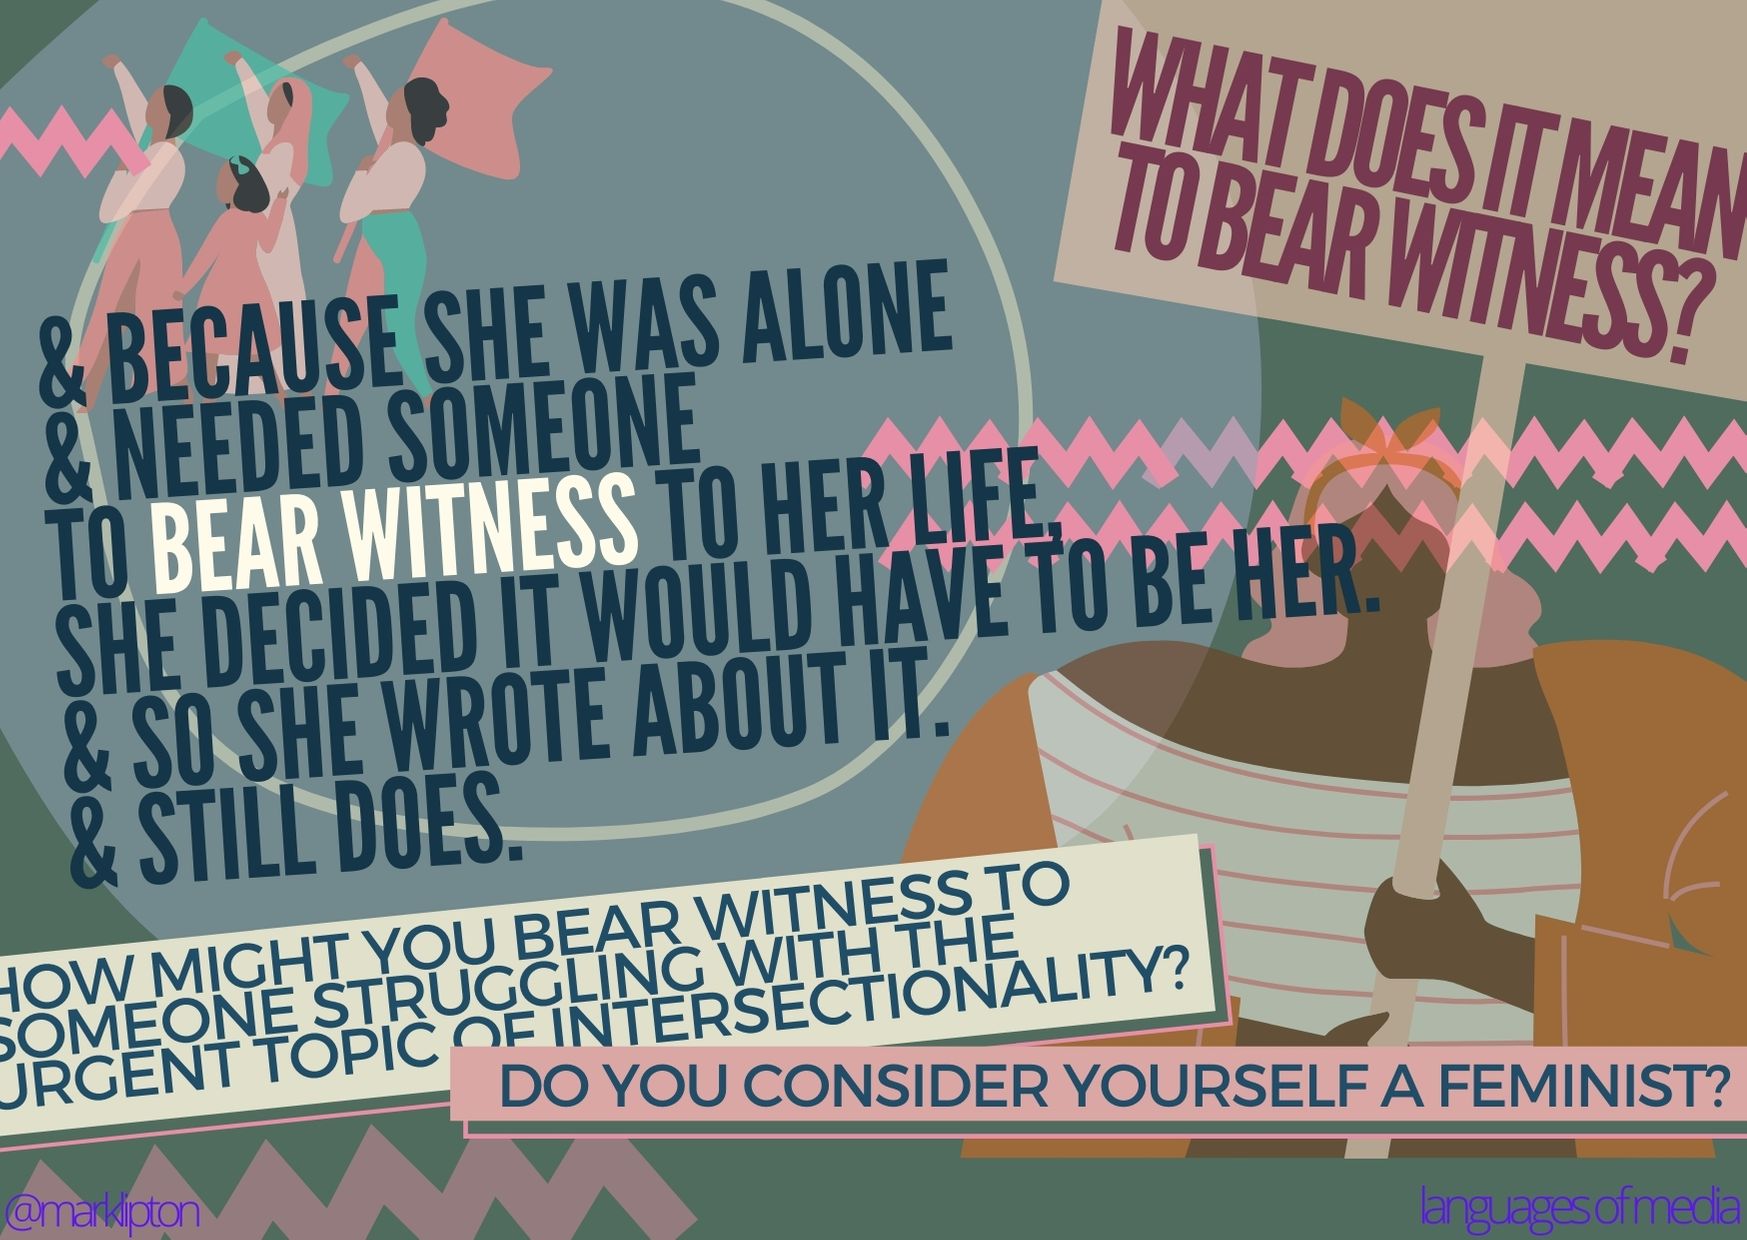 image: What does it mean to bear witness? & because she was alone & needed someone to bear witness to her life, she decided it would have to be her & so, she wrote about it & still does. How might you bear witness to someone struggling with the urgent topic of intersectionality? Do you consider yourself a feminist?